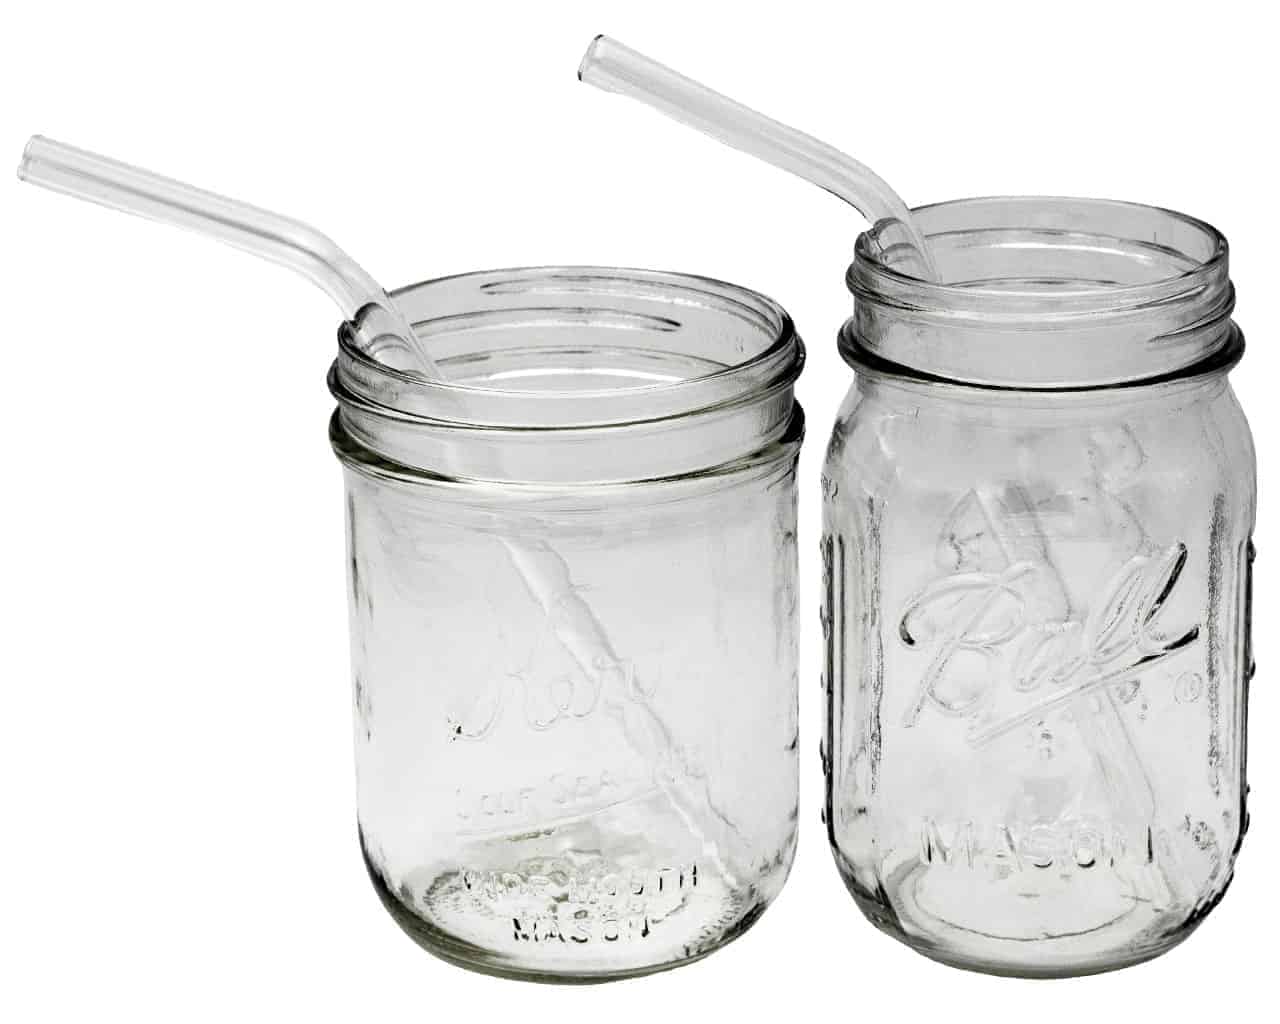 NewHome 16oz. Mason Jar Cups w/Bamboo Lids Glass Straws & Cleaning Brush in Transparent